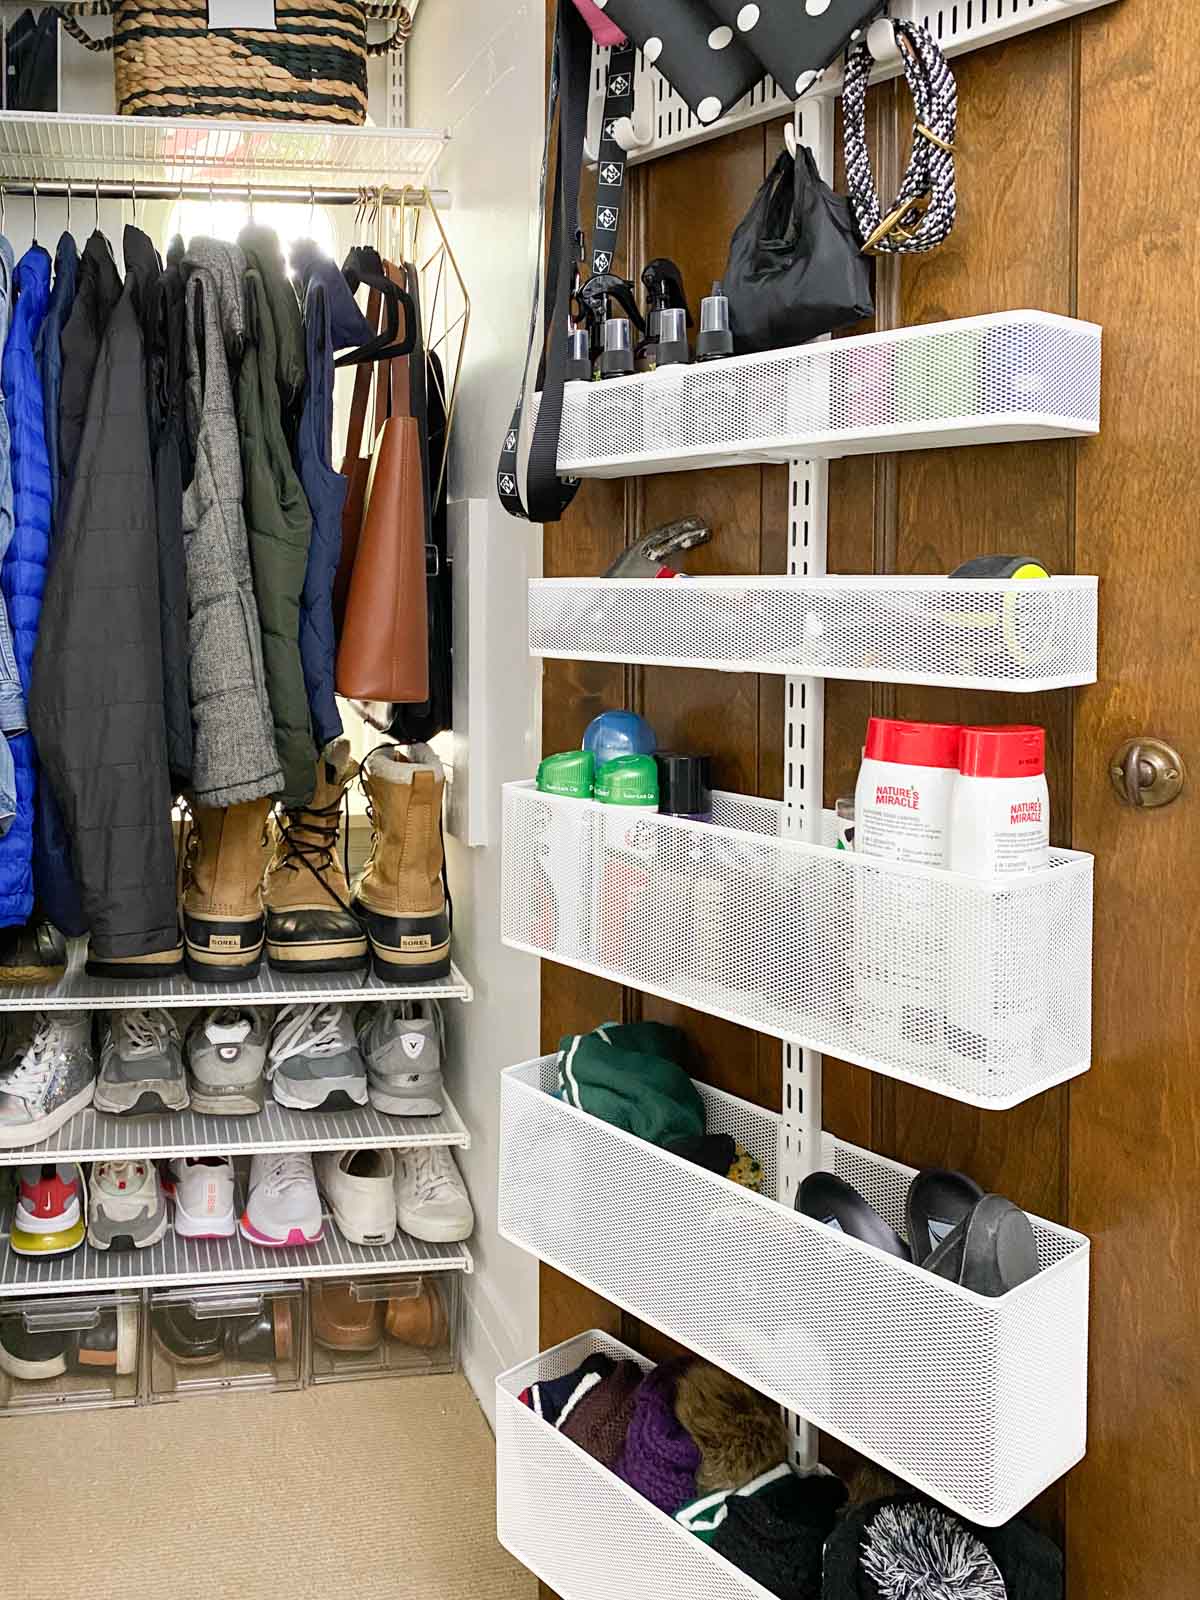 11 Shoe Storage Tips for Creating an Organized Entryway - Northern Feeling